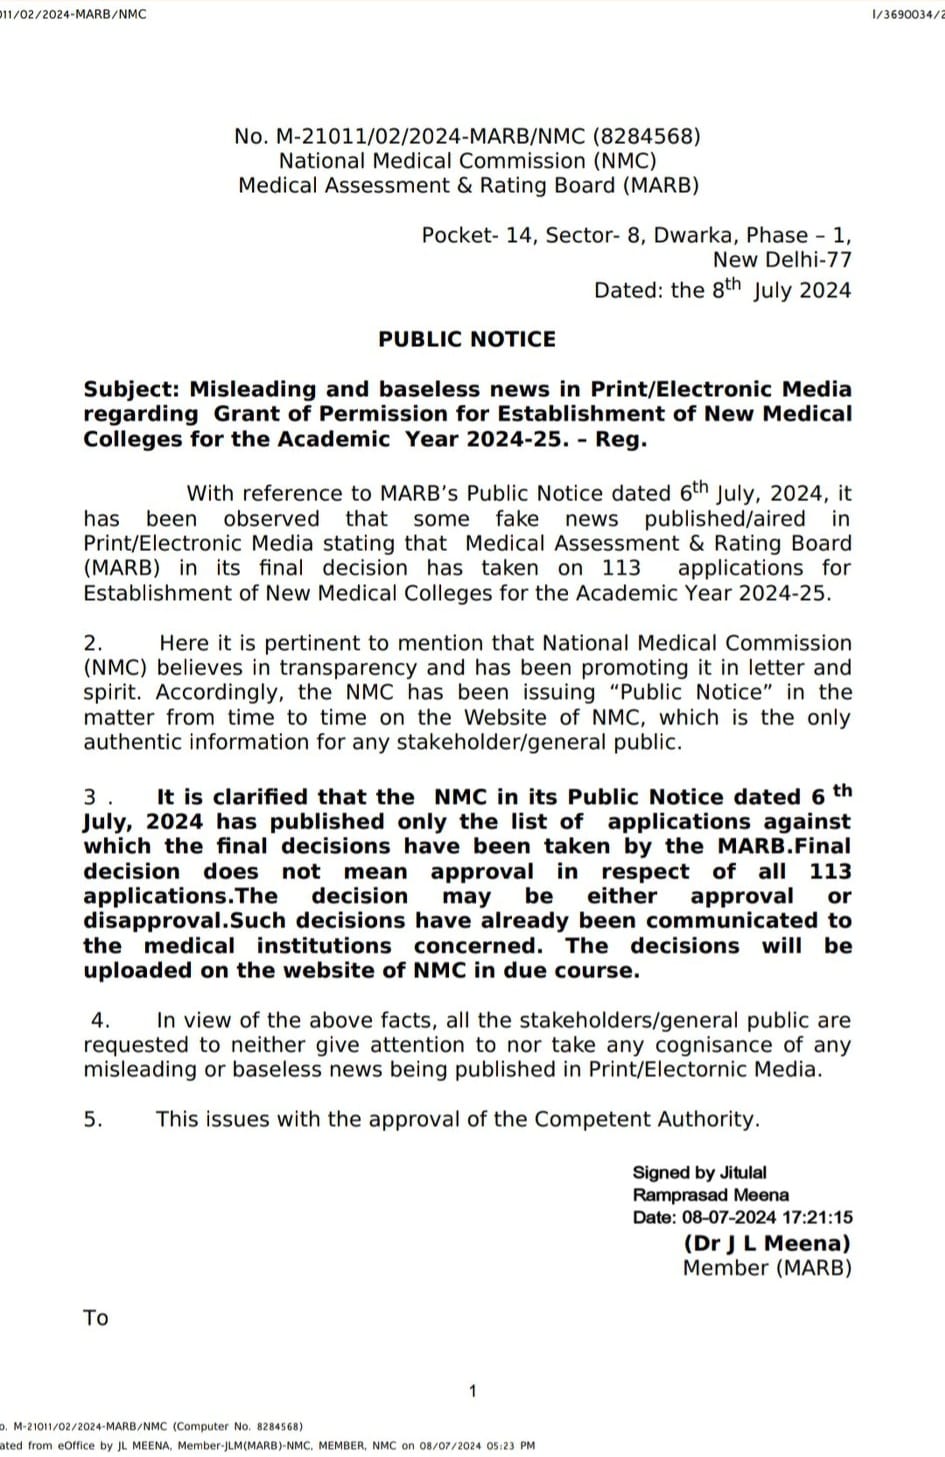 NMC Debunks Misleading News on New Medical College Approvals